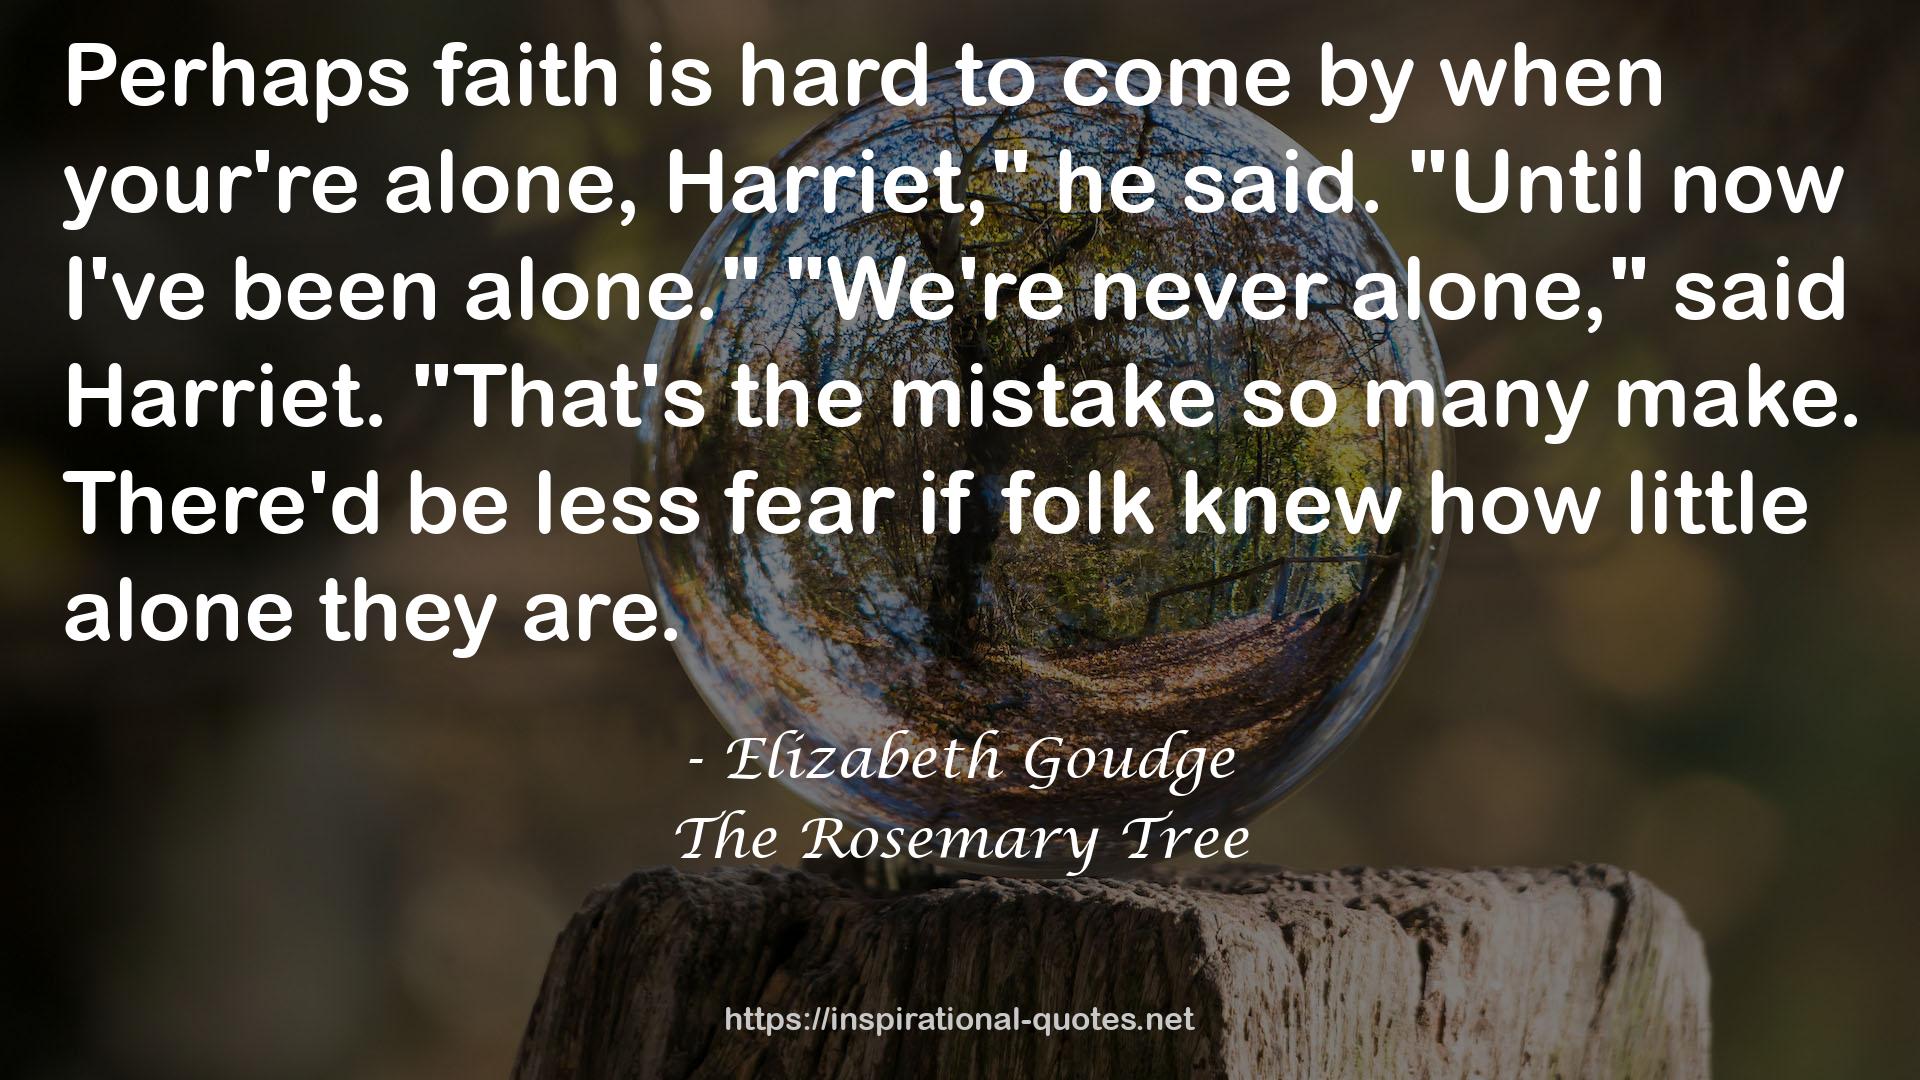 The Rosemary Tree QUOTES